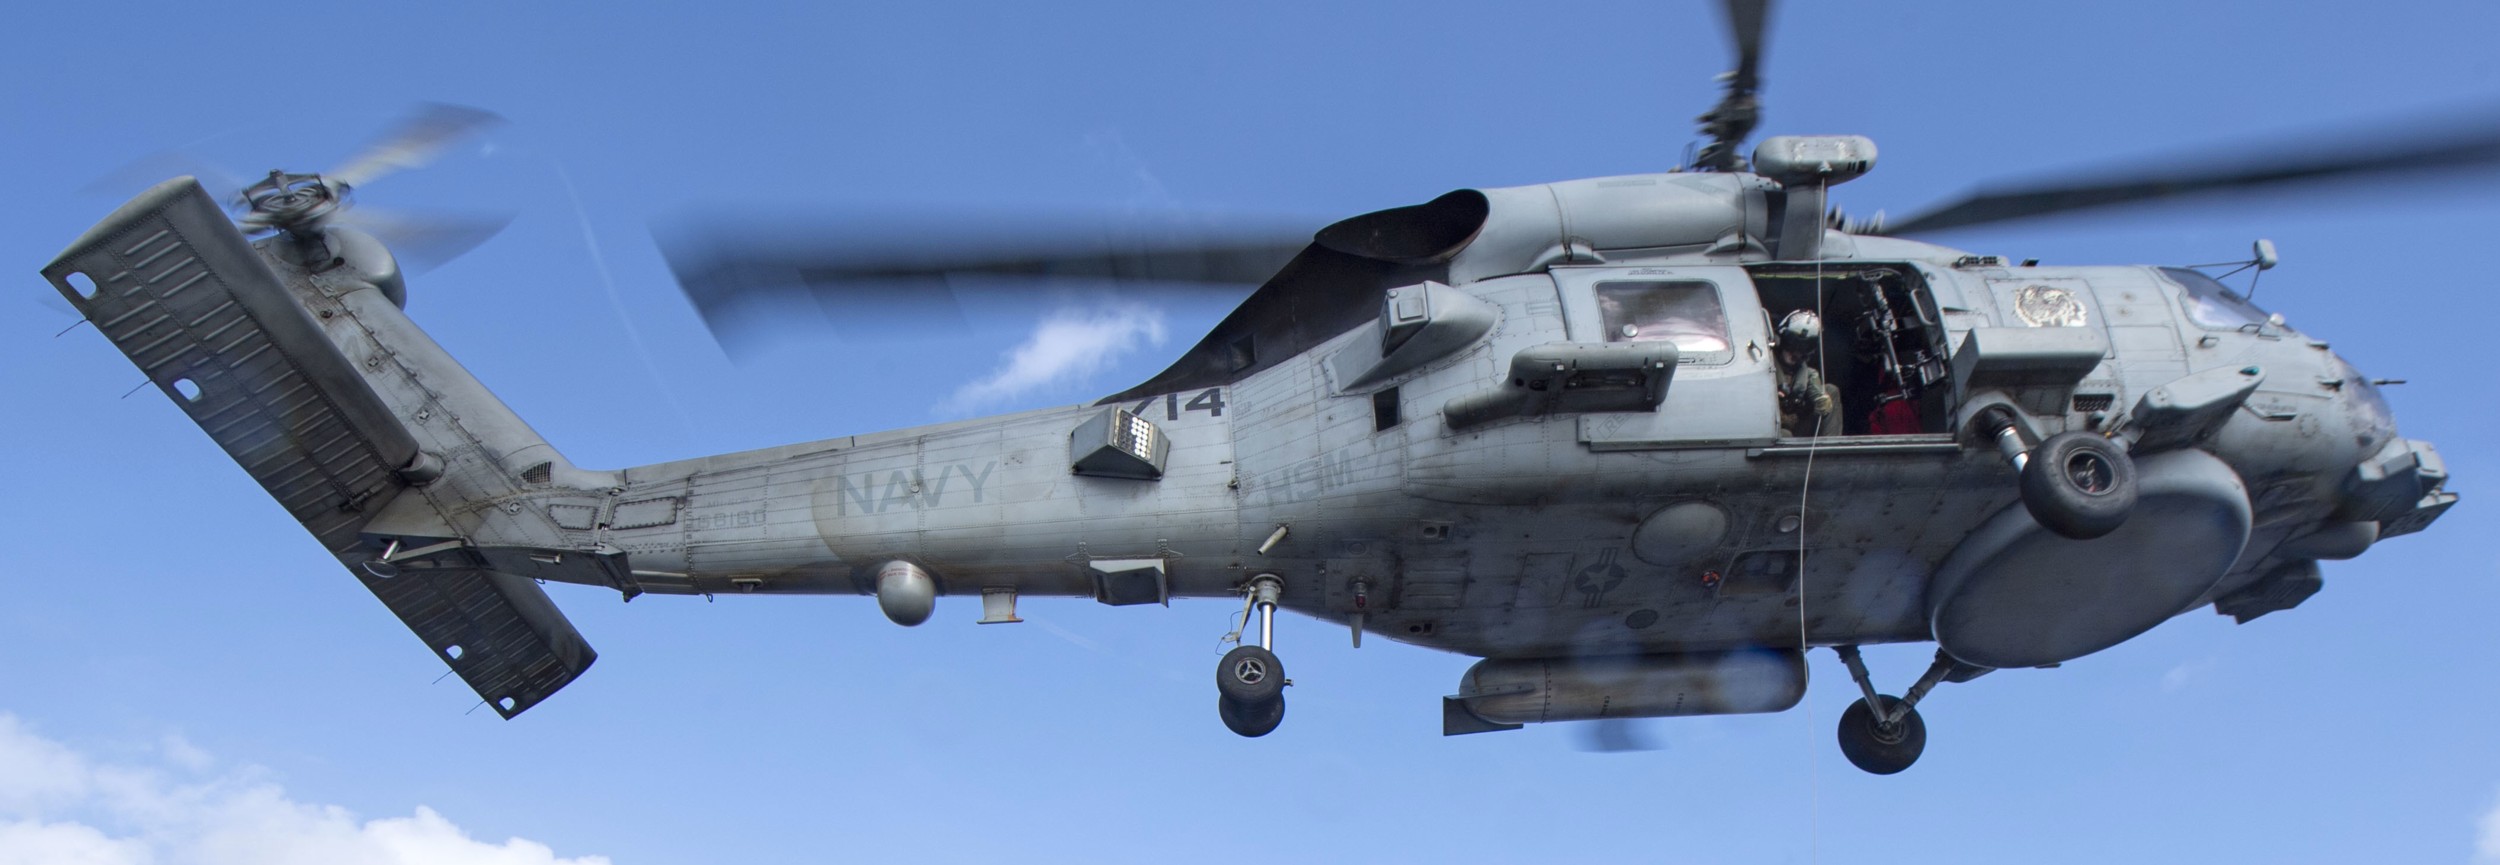 hsm-73 battlecats helicopter maritime strike squadron us navy mh-60r seahawk 2015 53